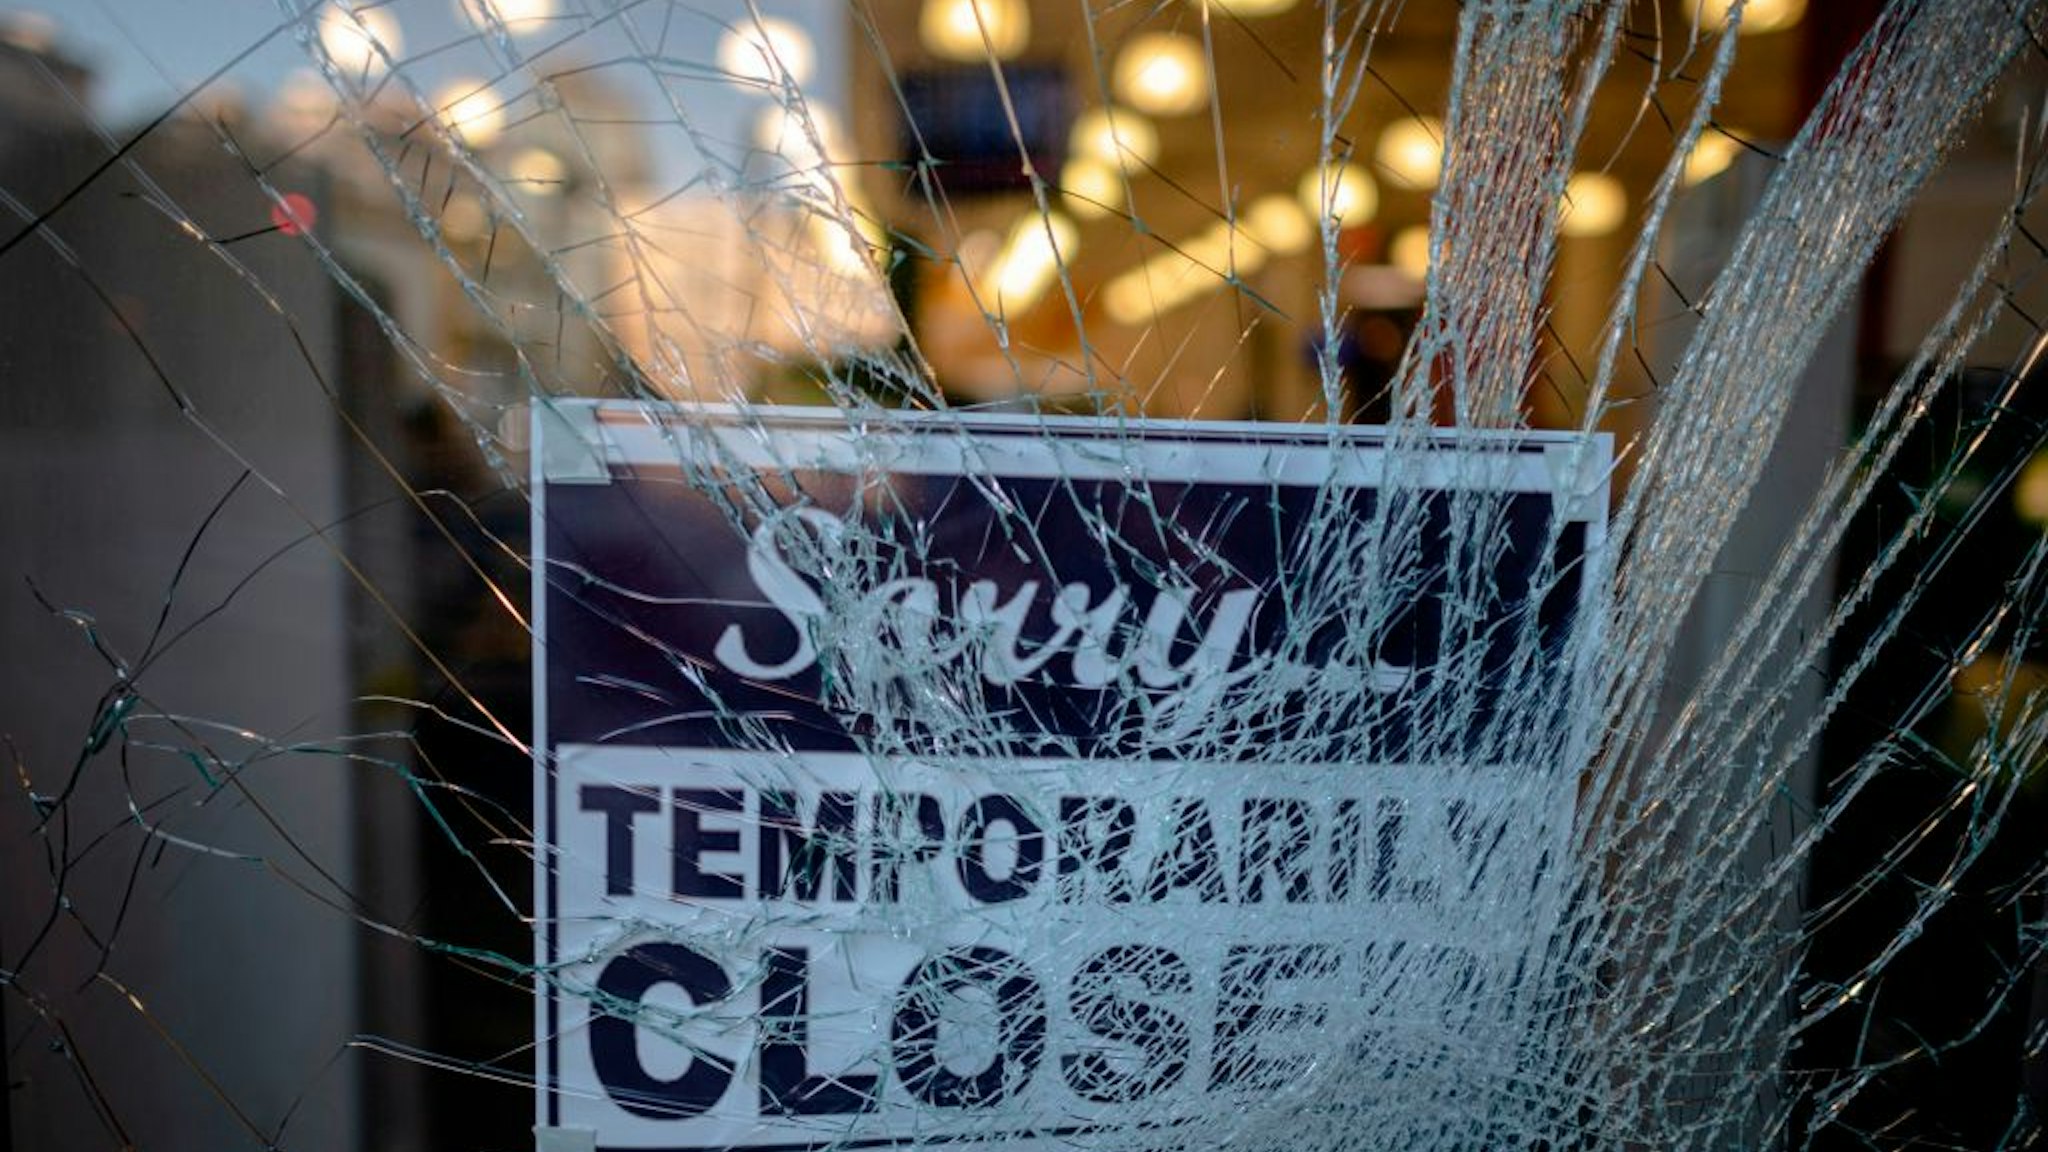 A sign reading "sorry temporarily closed" is seen behind a shattered glass of a storefront after a night of protest over the death of African-American man George Floyd in Minneapolis on June 1, 2020 in Lower Manhattan in New York City. - Thousands of National Guard troops patrolled major US cities after five consecutive nights of protests over racism and police brutality that boiled over into arson and looting, sending shock waves through the country. The death Monday of an unarmed black man, George Floyd, at the hands of police in Minneapolis ignited this latest wave of outrage in the US over law enforcement's repeated use of lethal force against African Americans -- this one like others before captured on cellphone video. (Photo by Johannes EISELE / AFP) (Photo by JOHANNES EISELE/AFP via Getty Images)